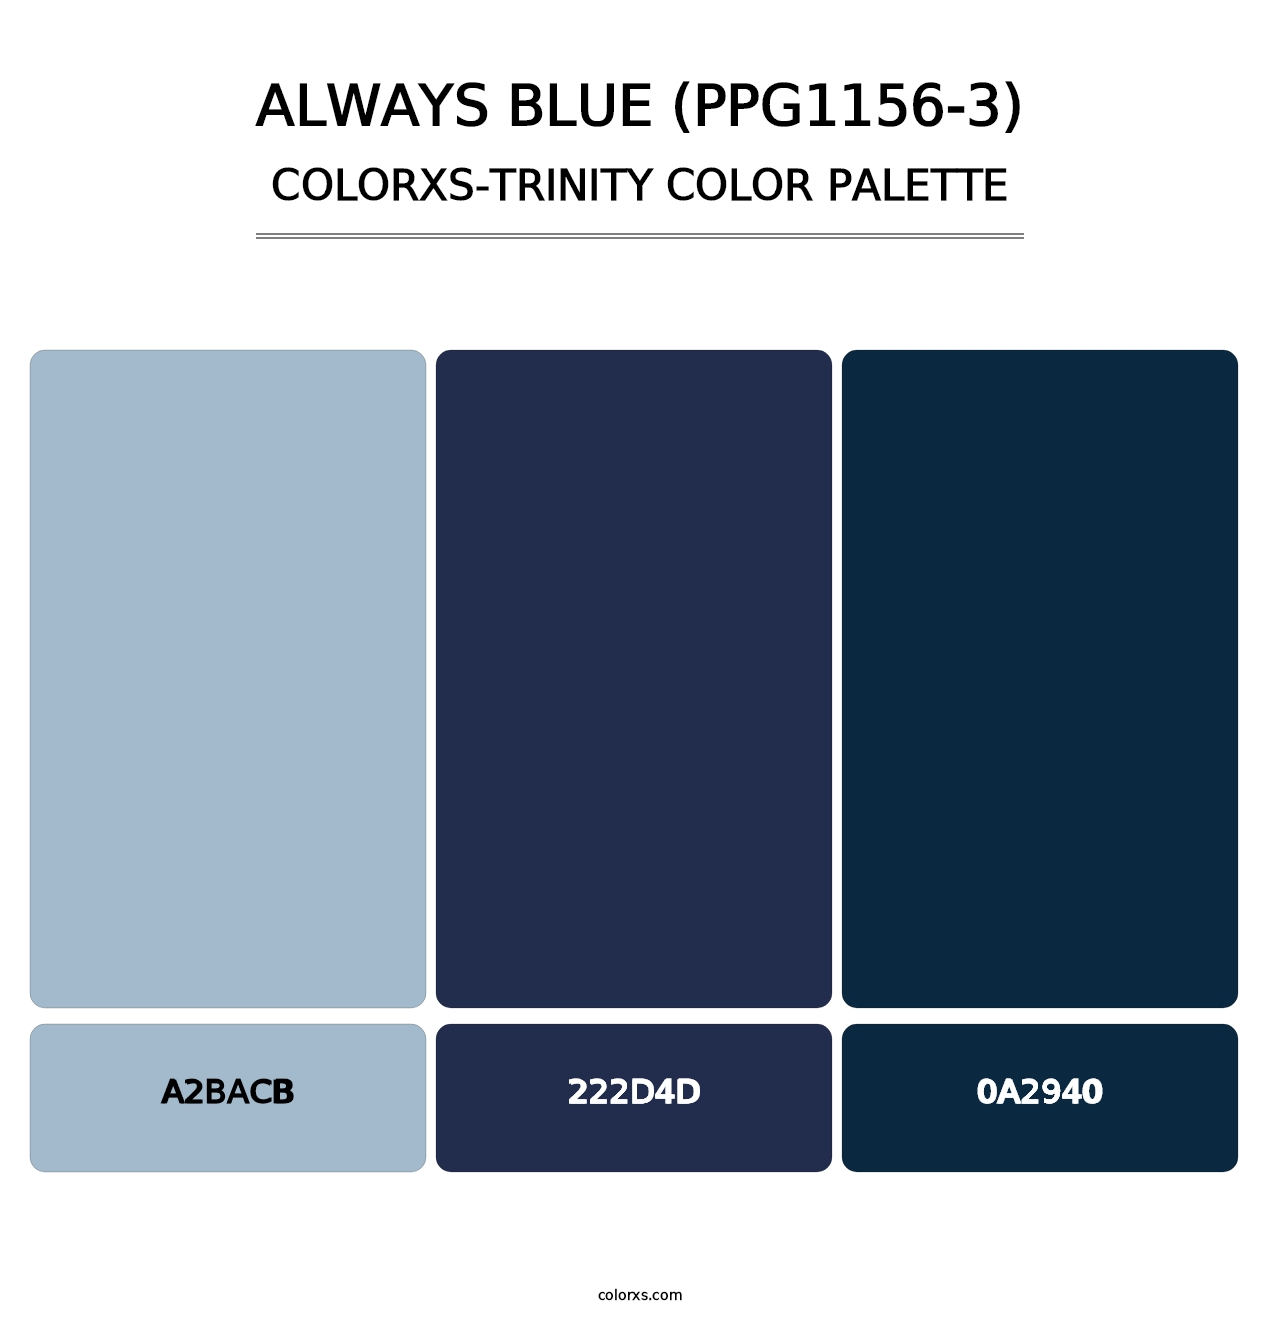 Always Blue (PPG1156-3) - Colorxs Trinity Palette